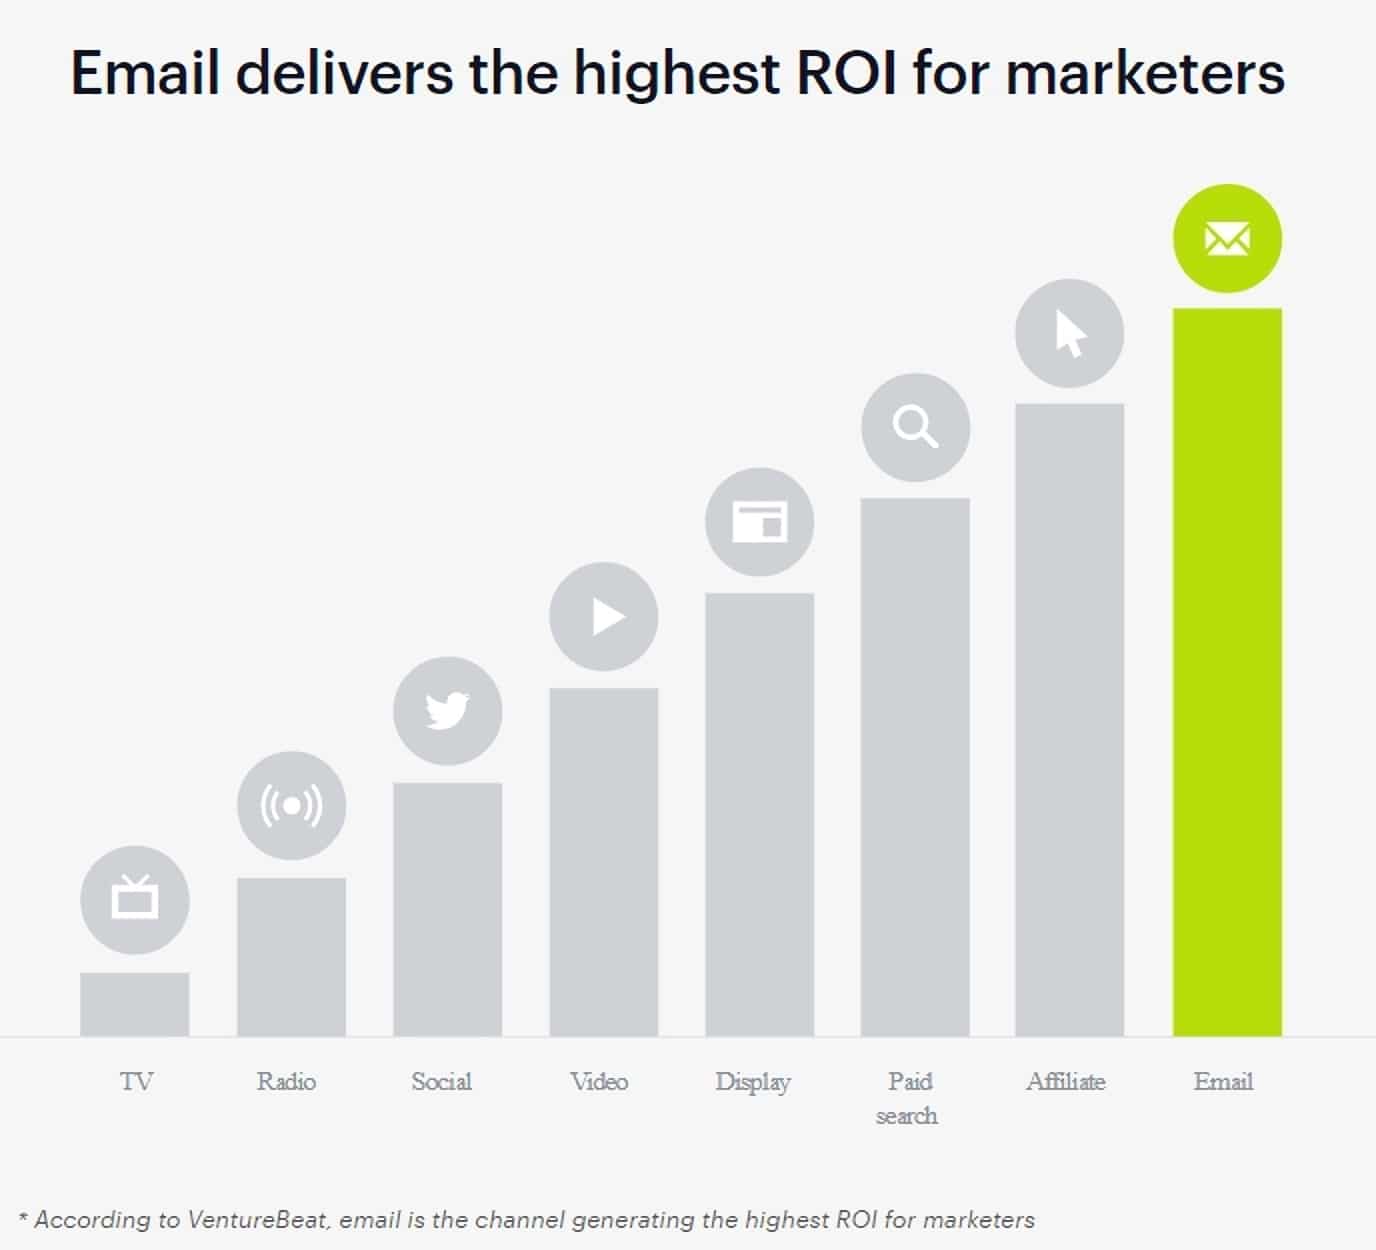 Email marketing delivers the highest ROI for marketers